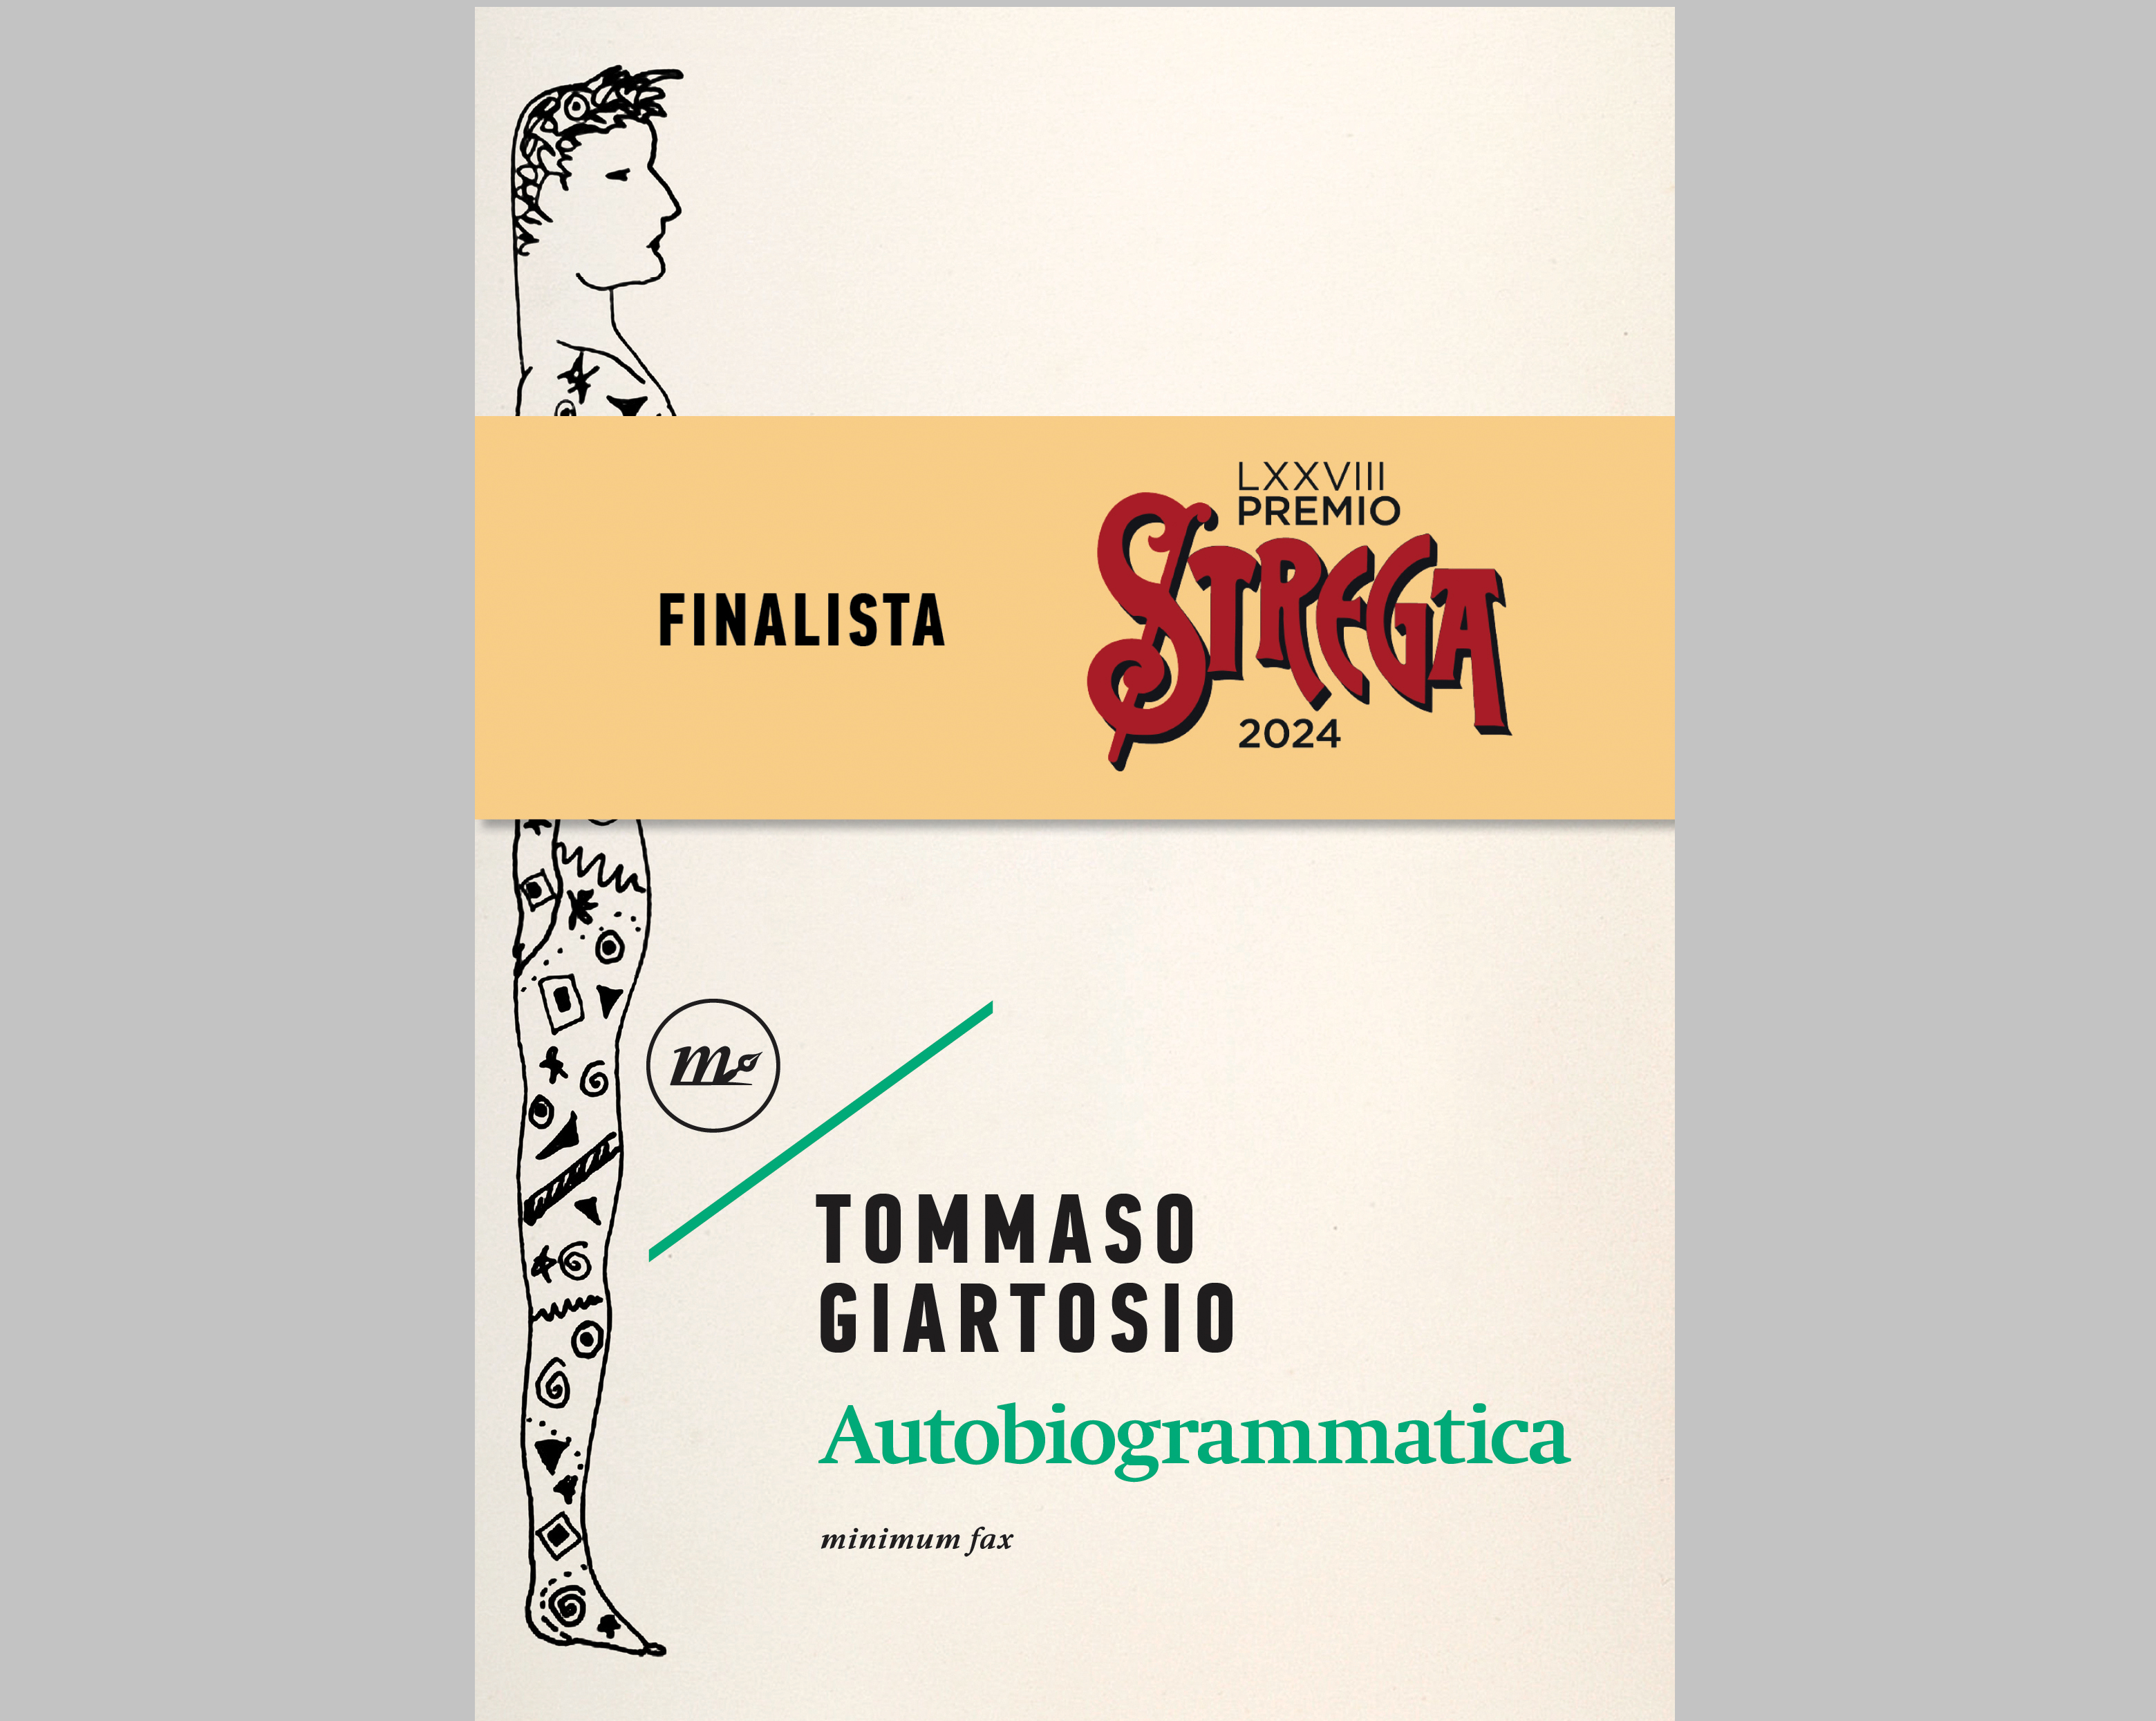 'Happy to be in the group of the Strega prize with a new idea of ​​literature”